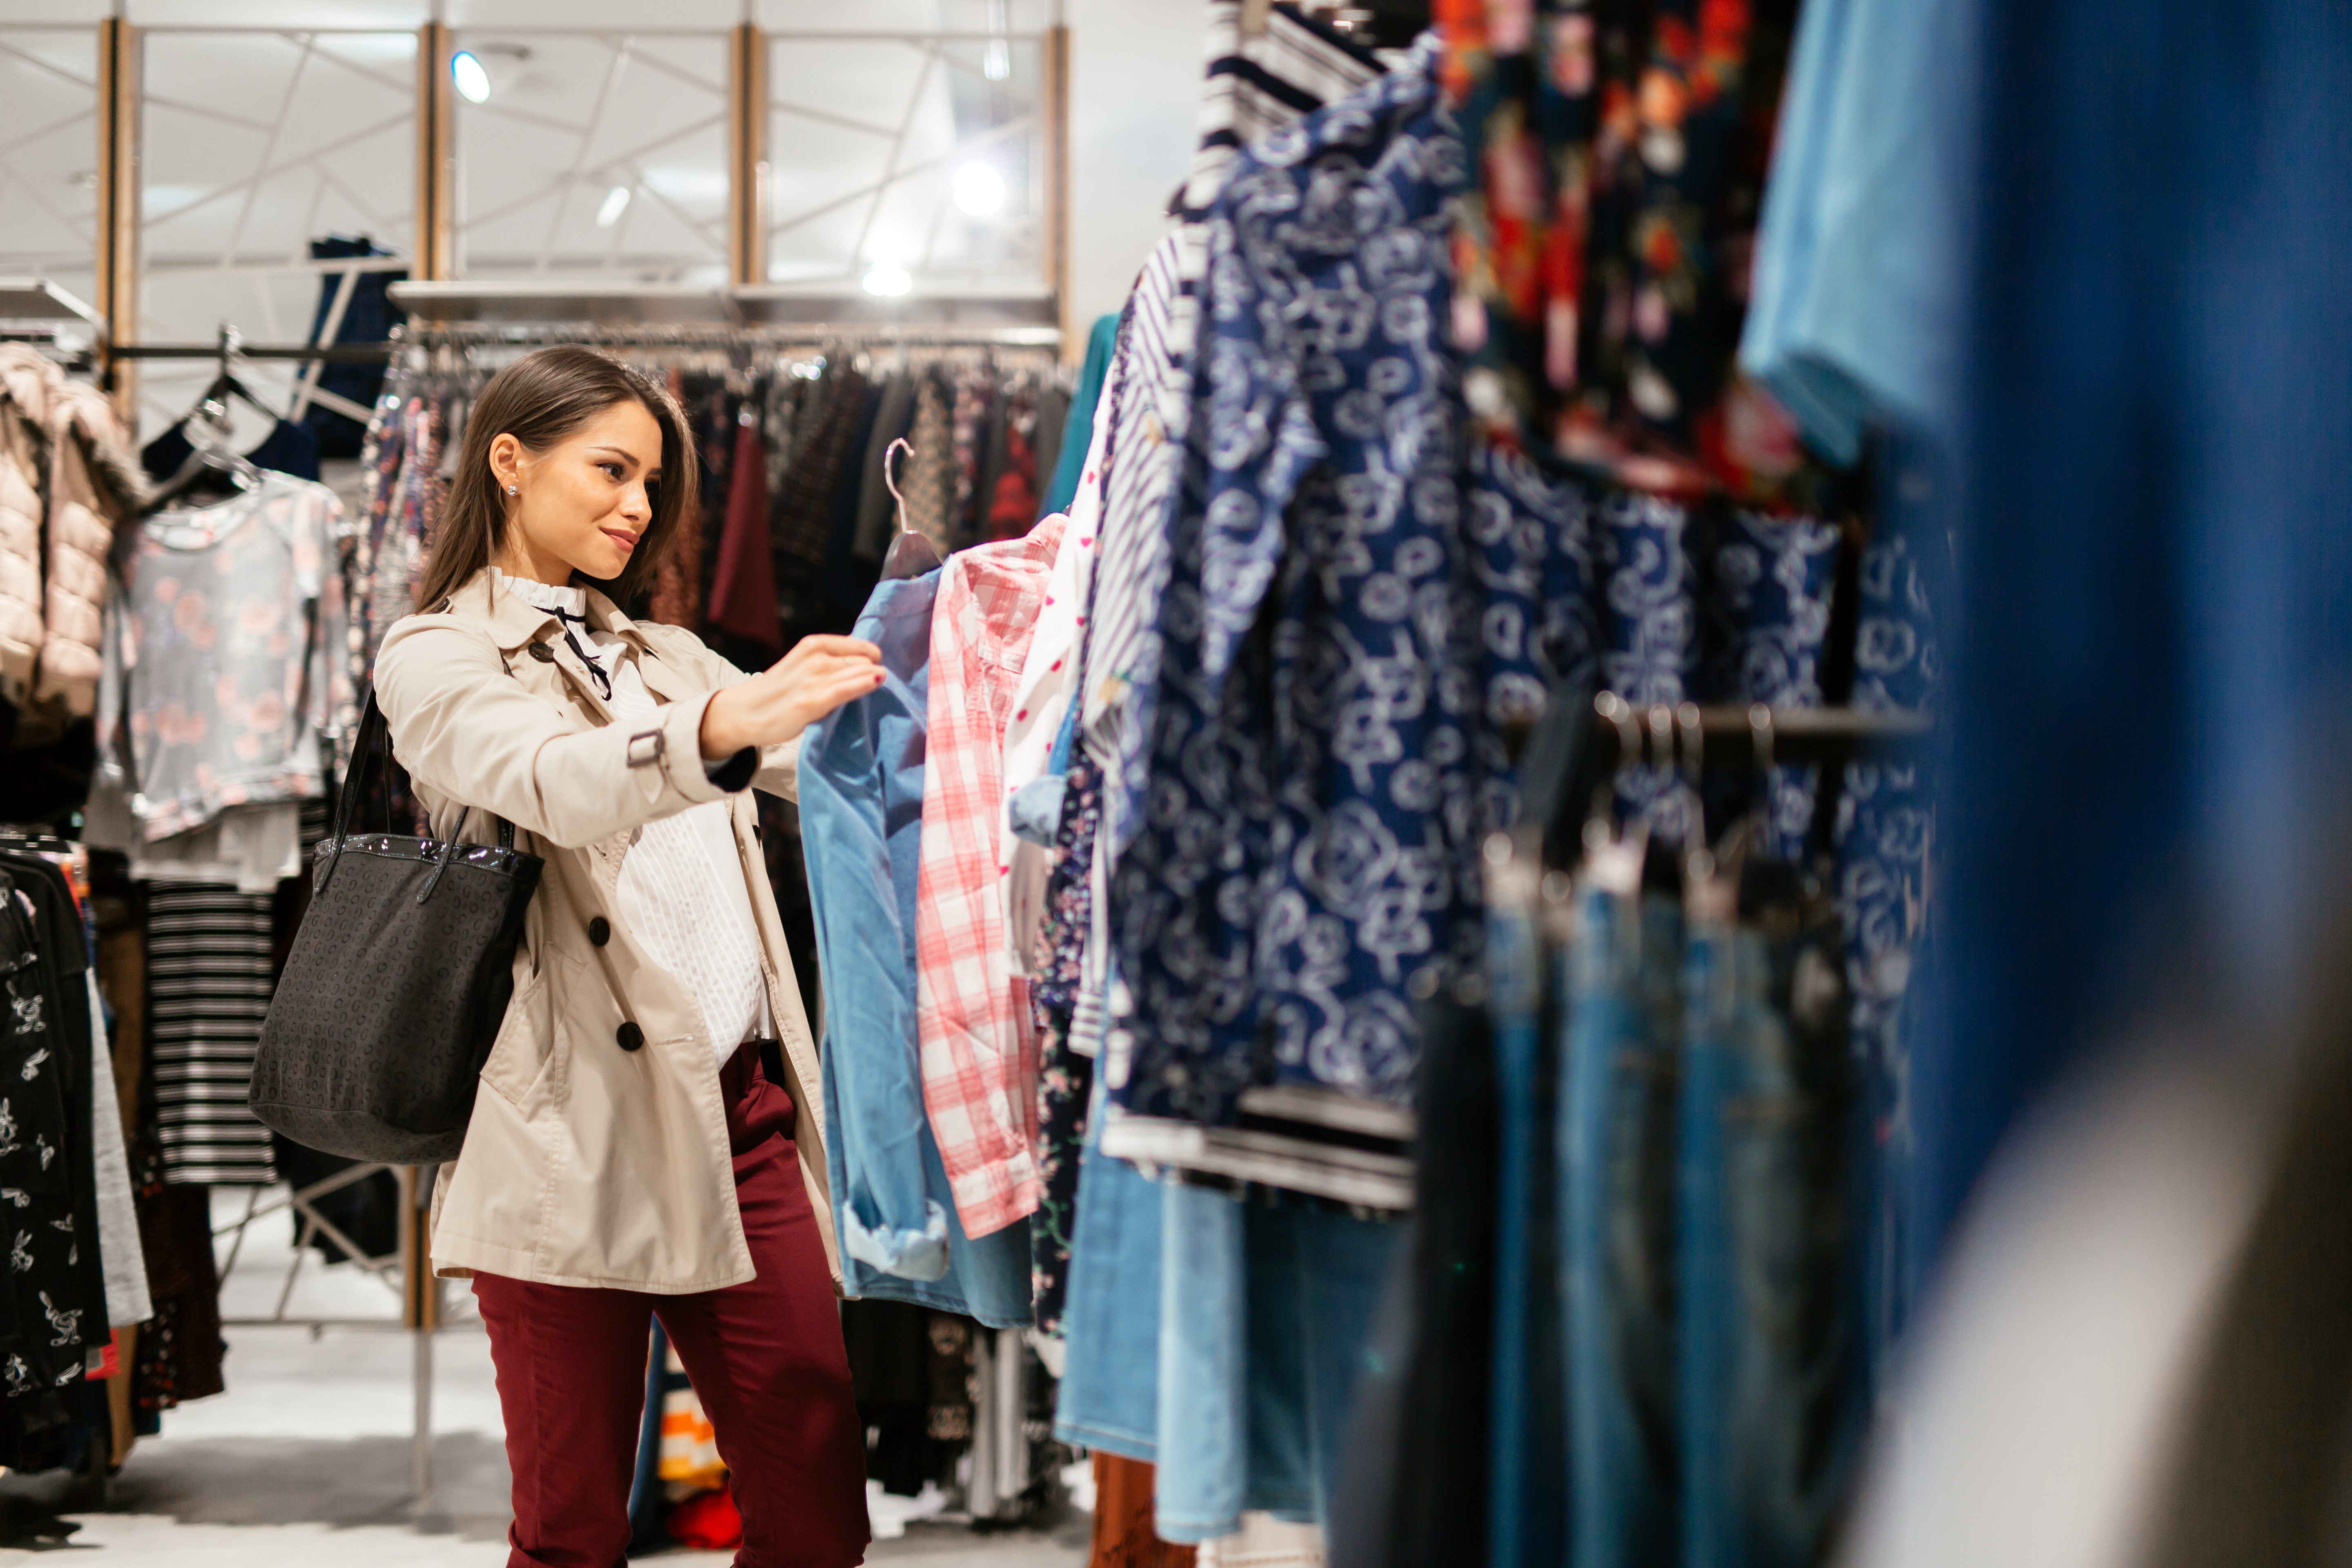 Retail therapy is proven to work, but at what psychological cost 